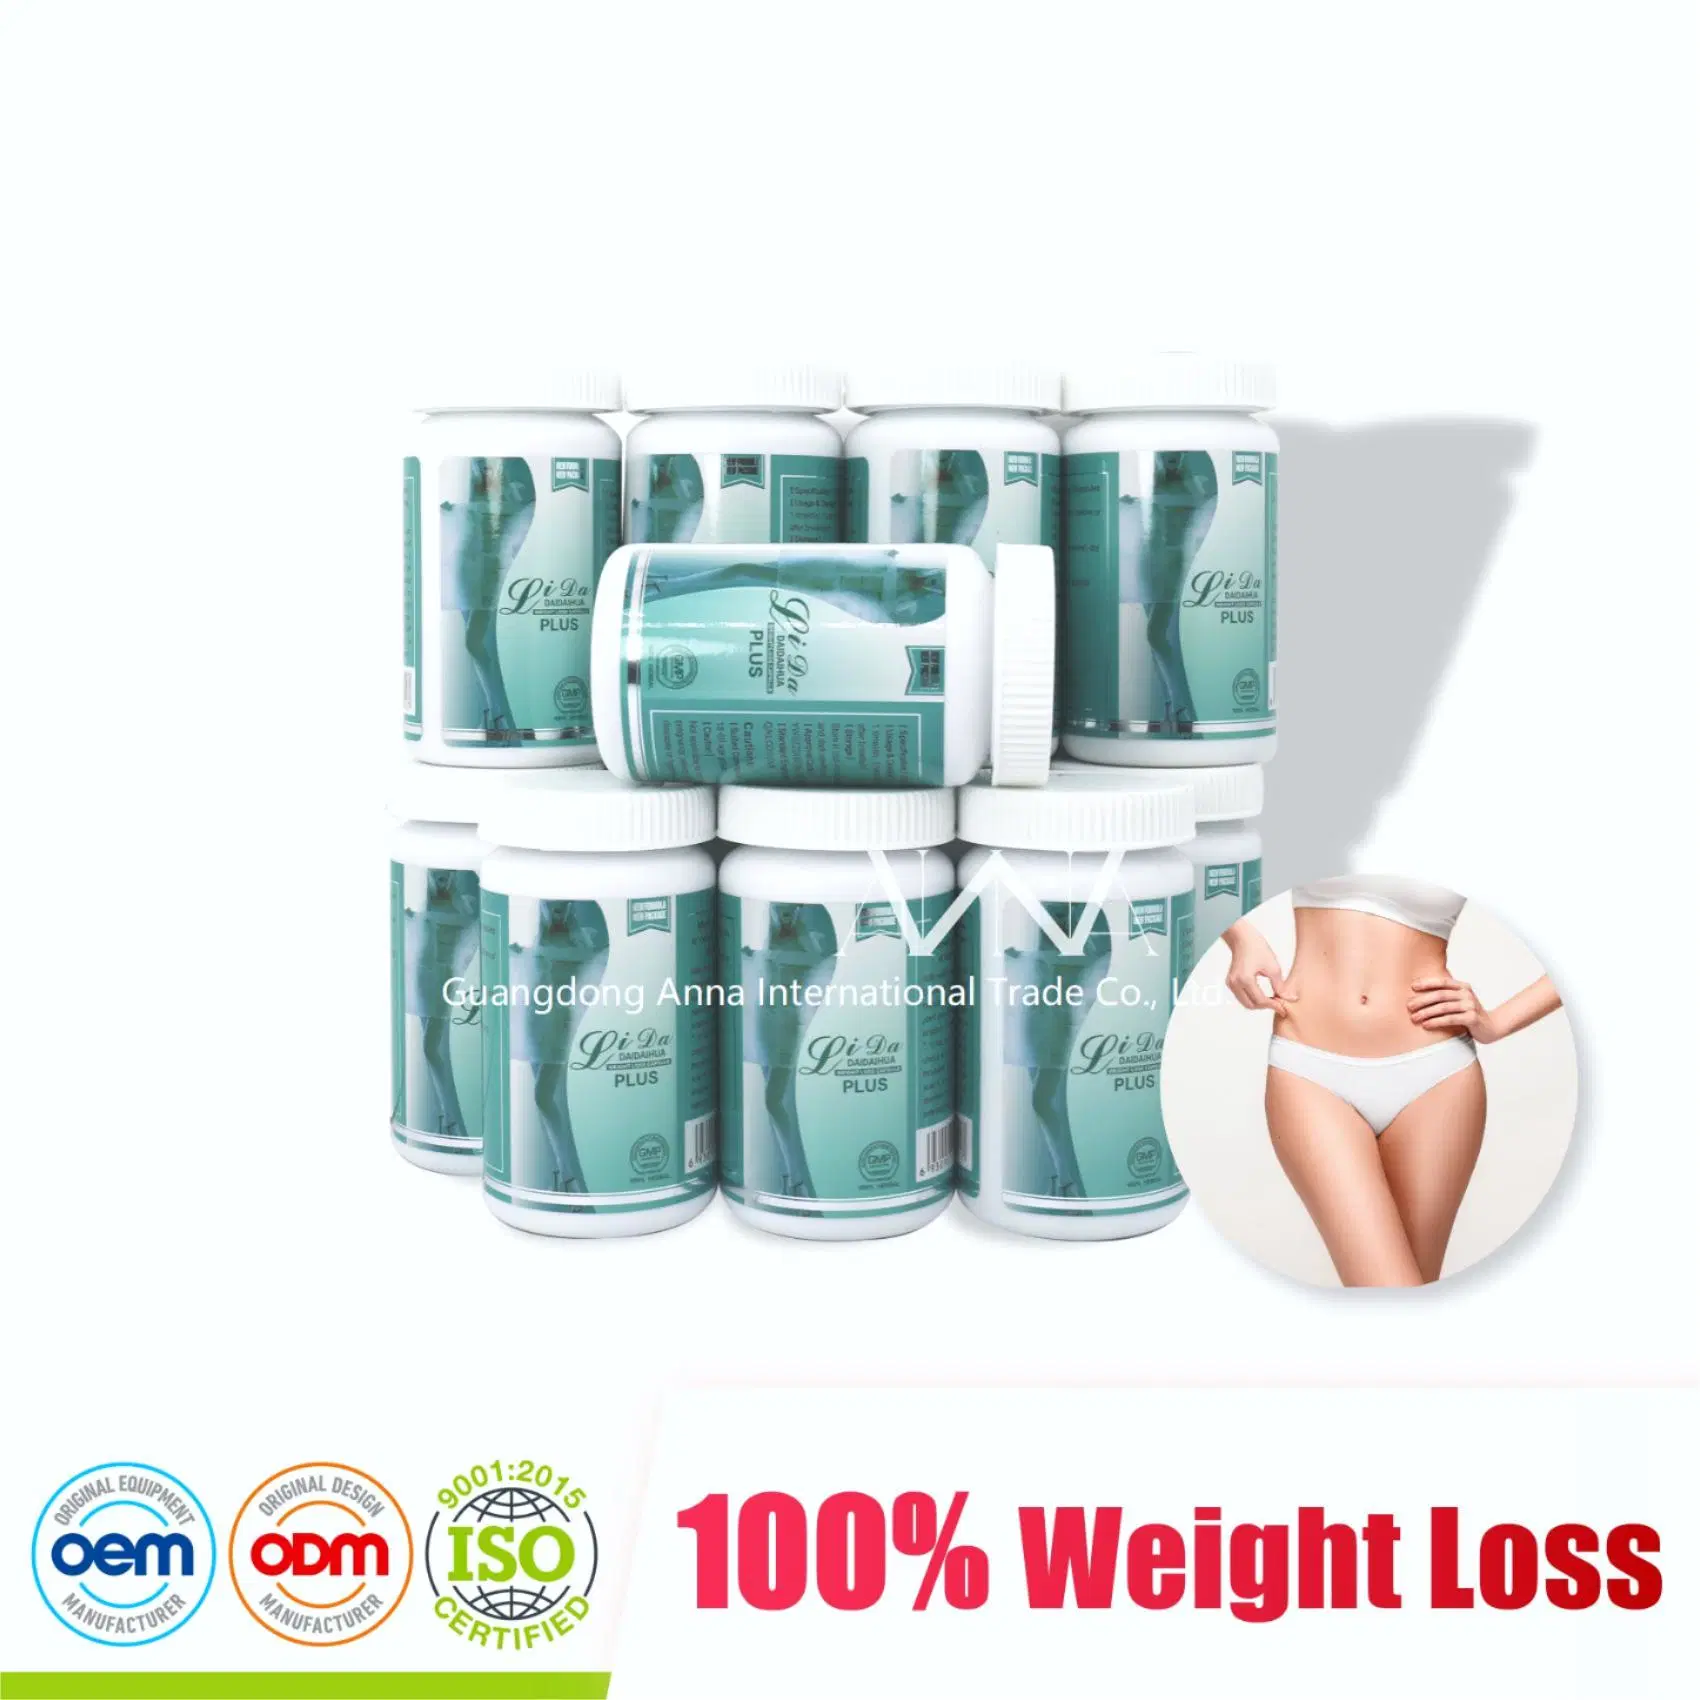 Original 100% Weight Loss Lida& Slimming Capsules Wholesale/Supplier in Stock